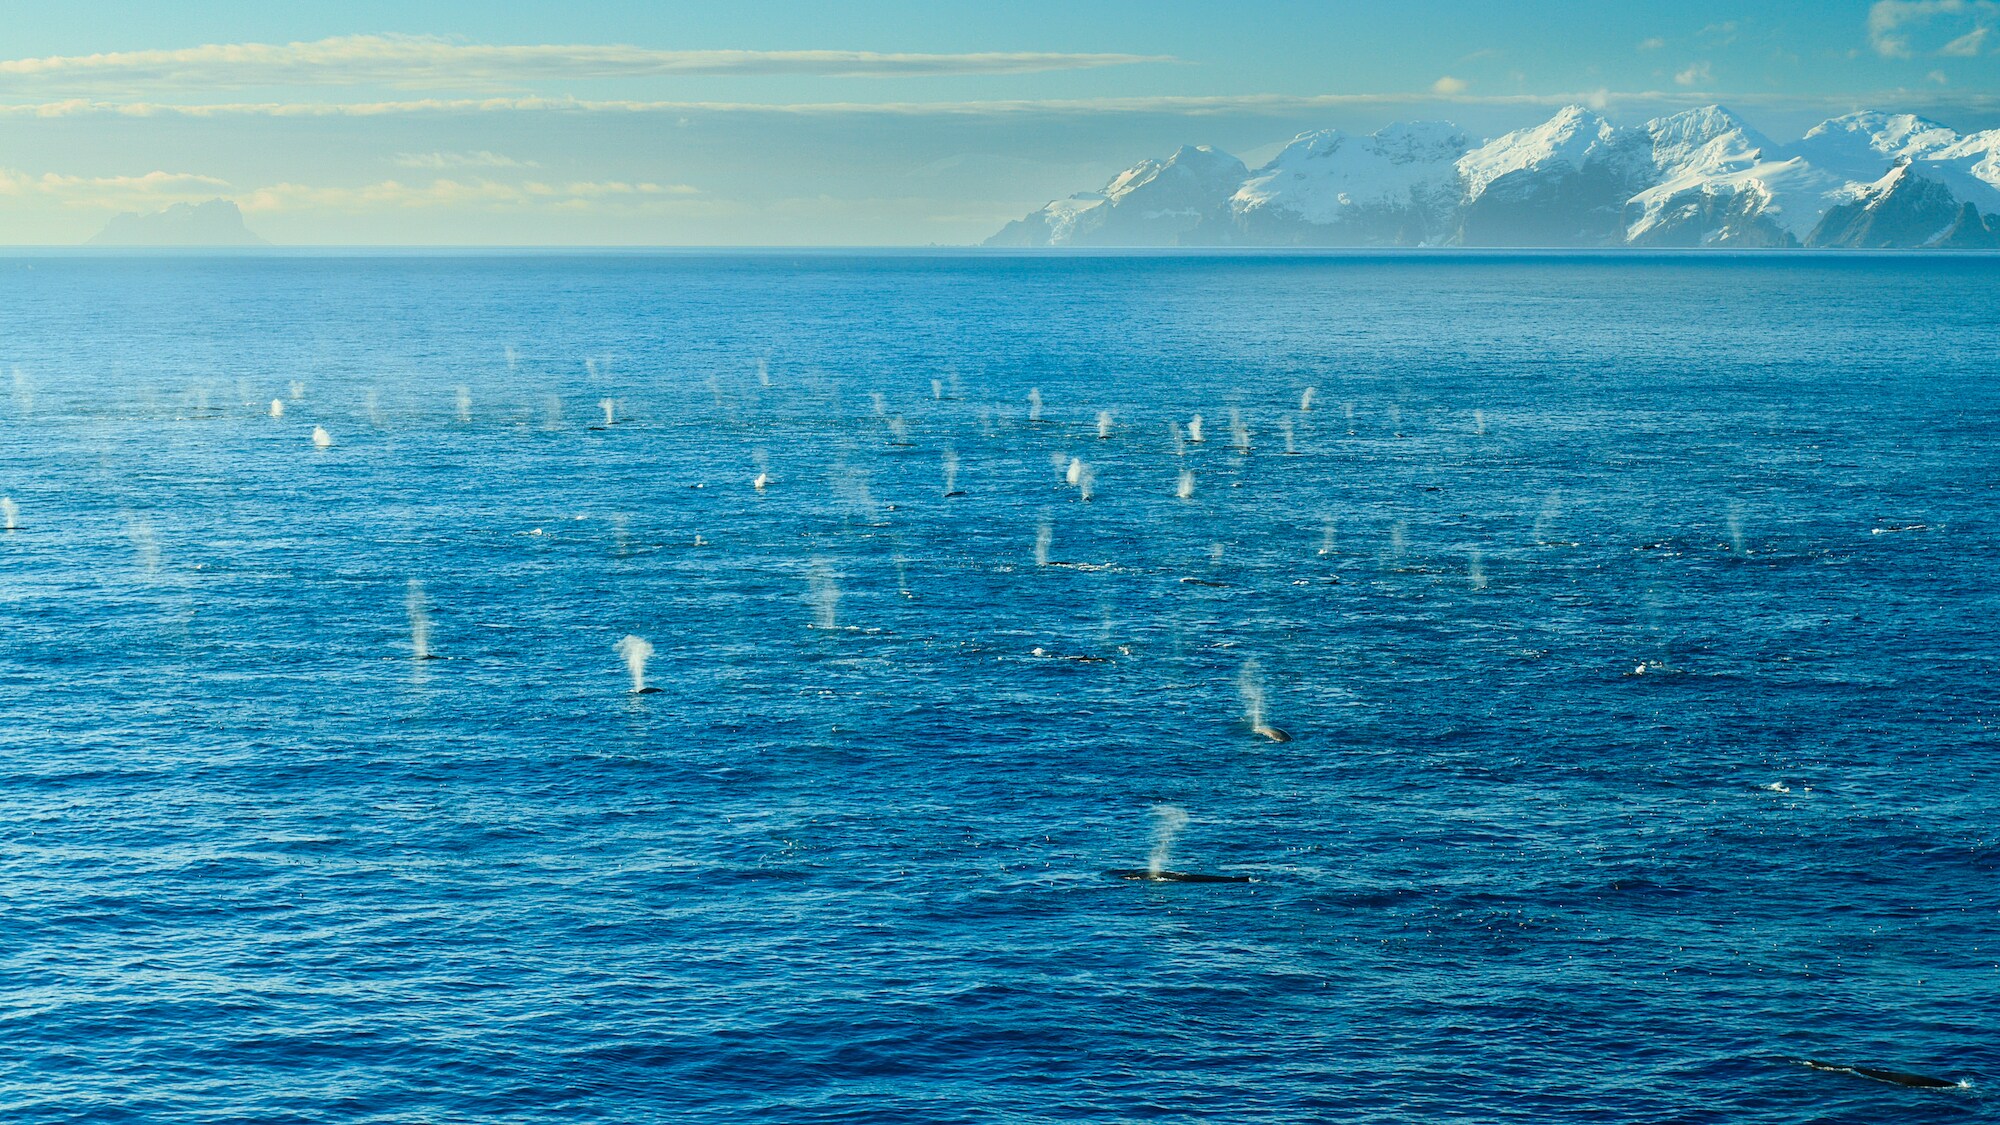 An gathering of Fin whales in the Southern Ocean. (Credit: National Geographic/Bertie Gregory for Disney+)